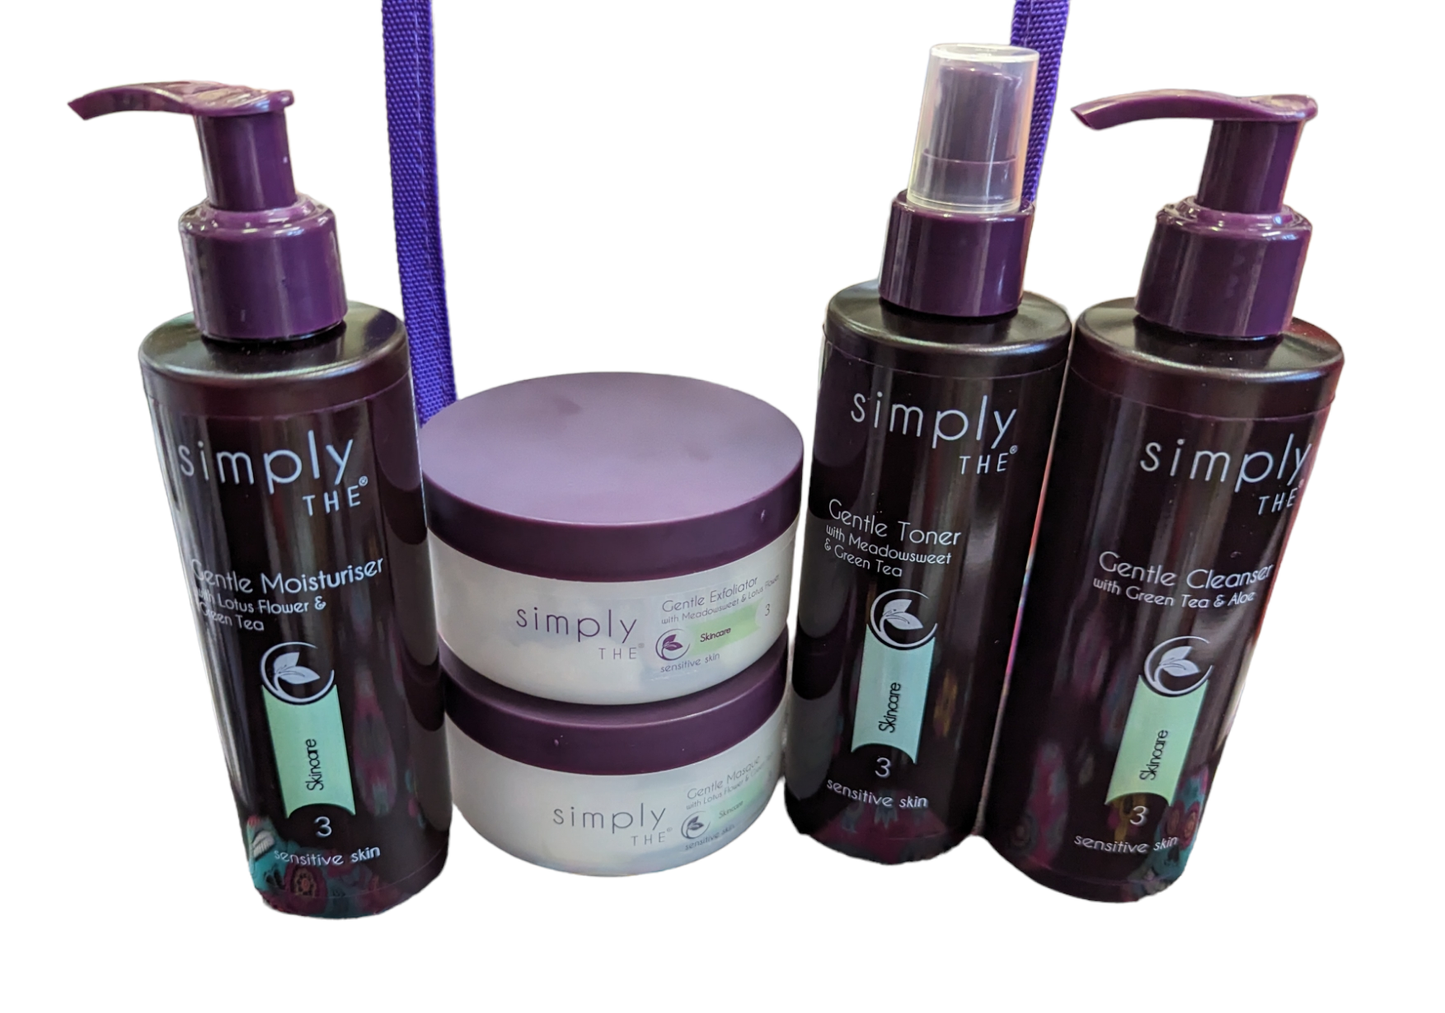 Simply The Gentle Facial Kit